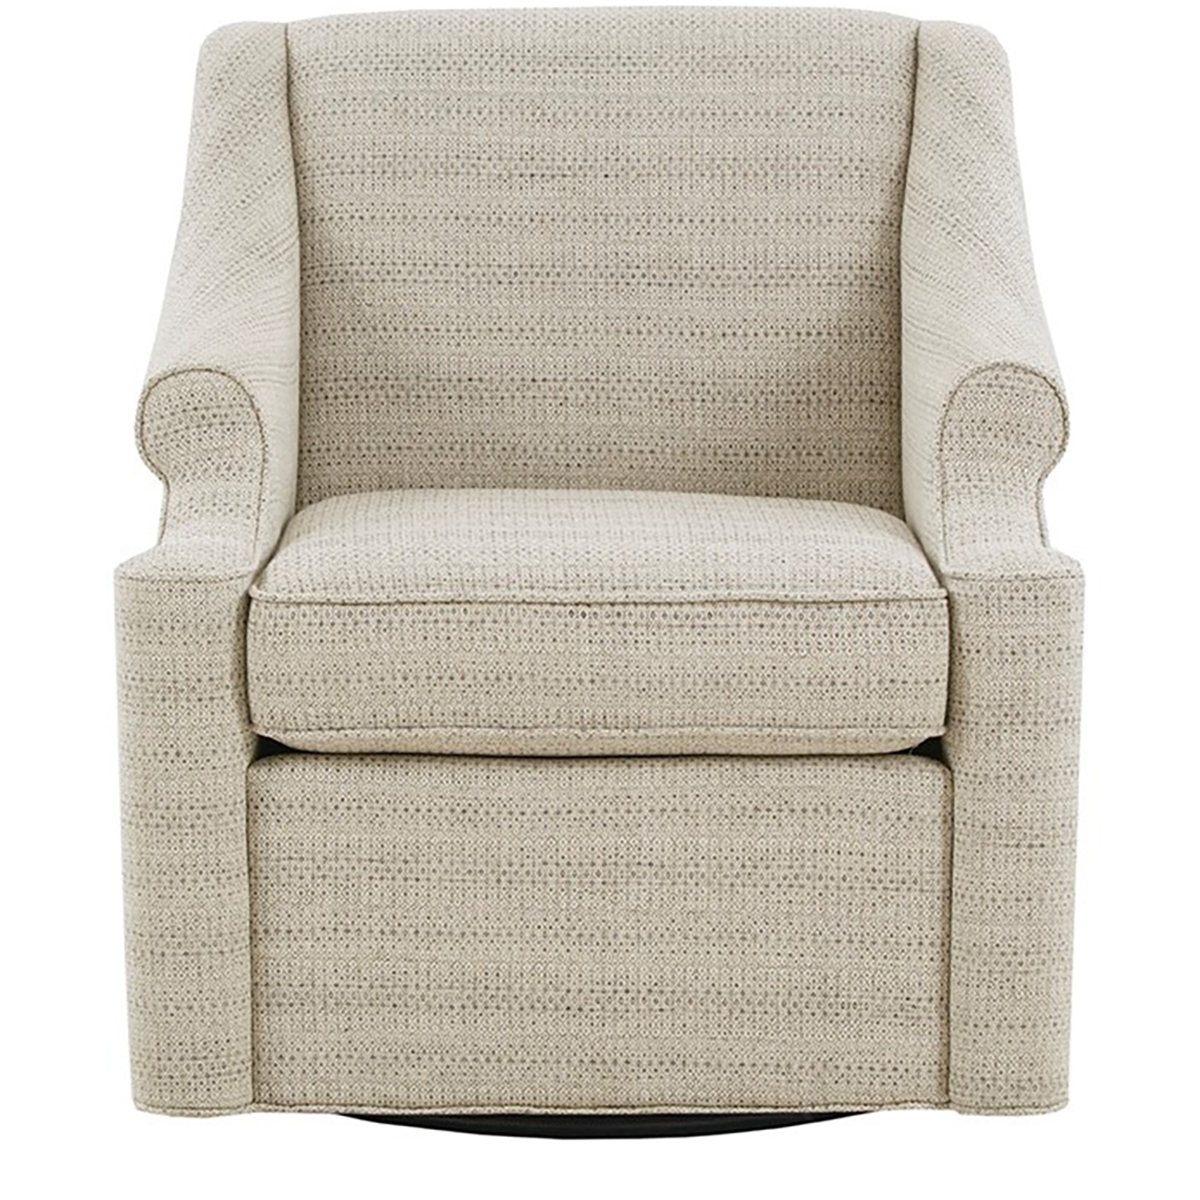 Picture of JUSTINE SWIVEL GLIDER CHAIR